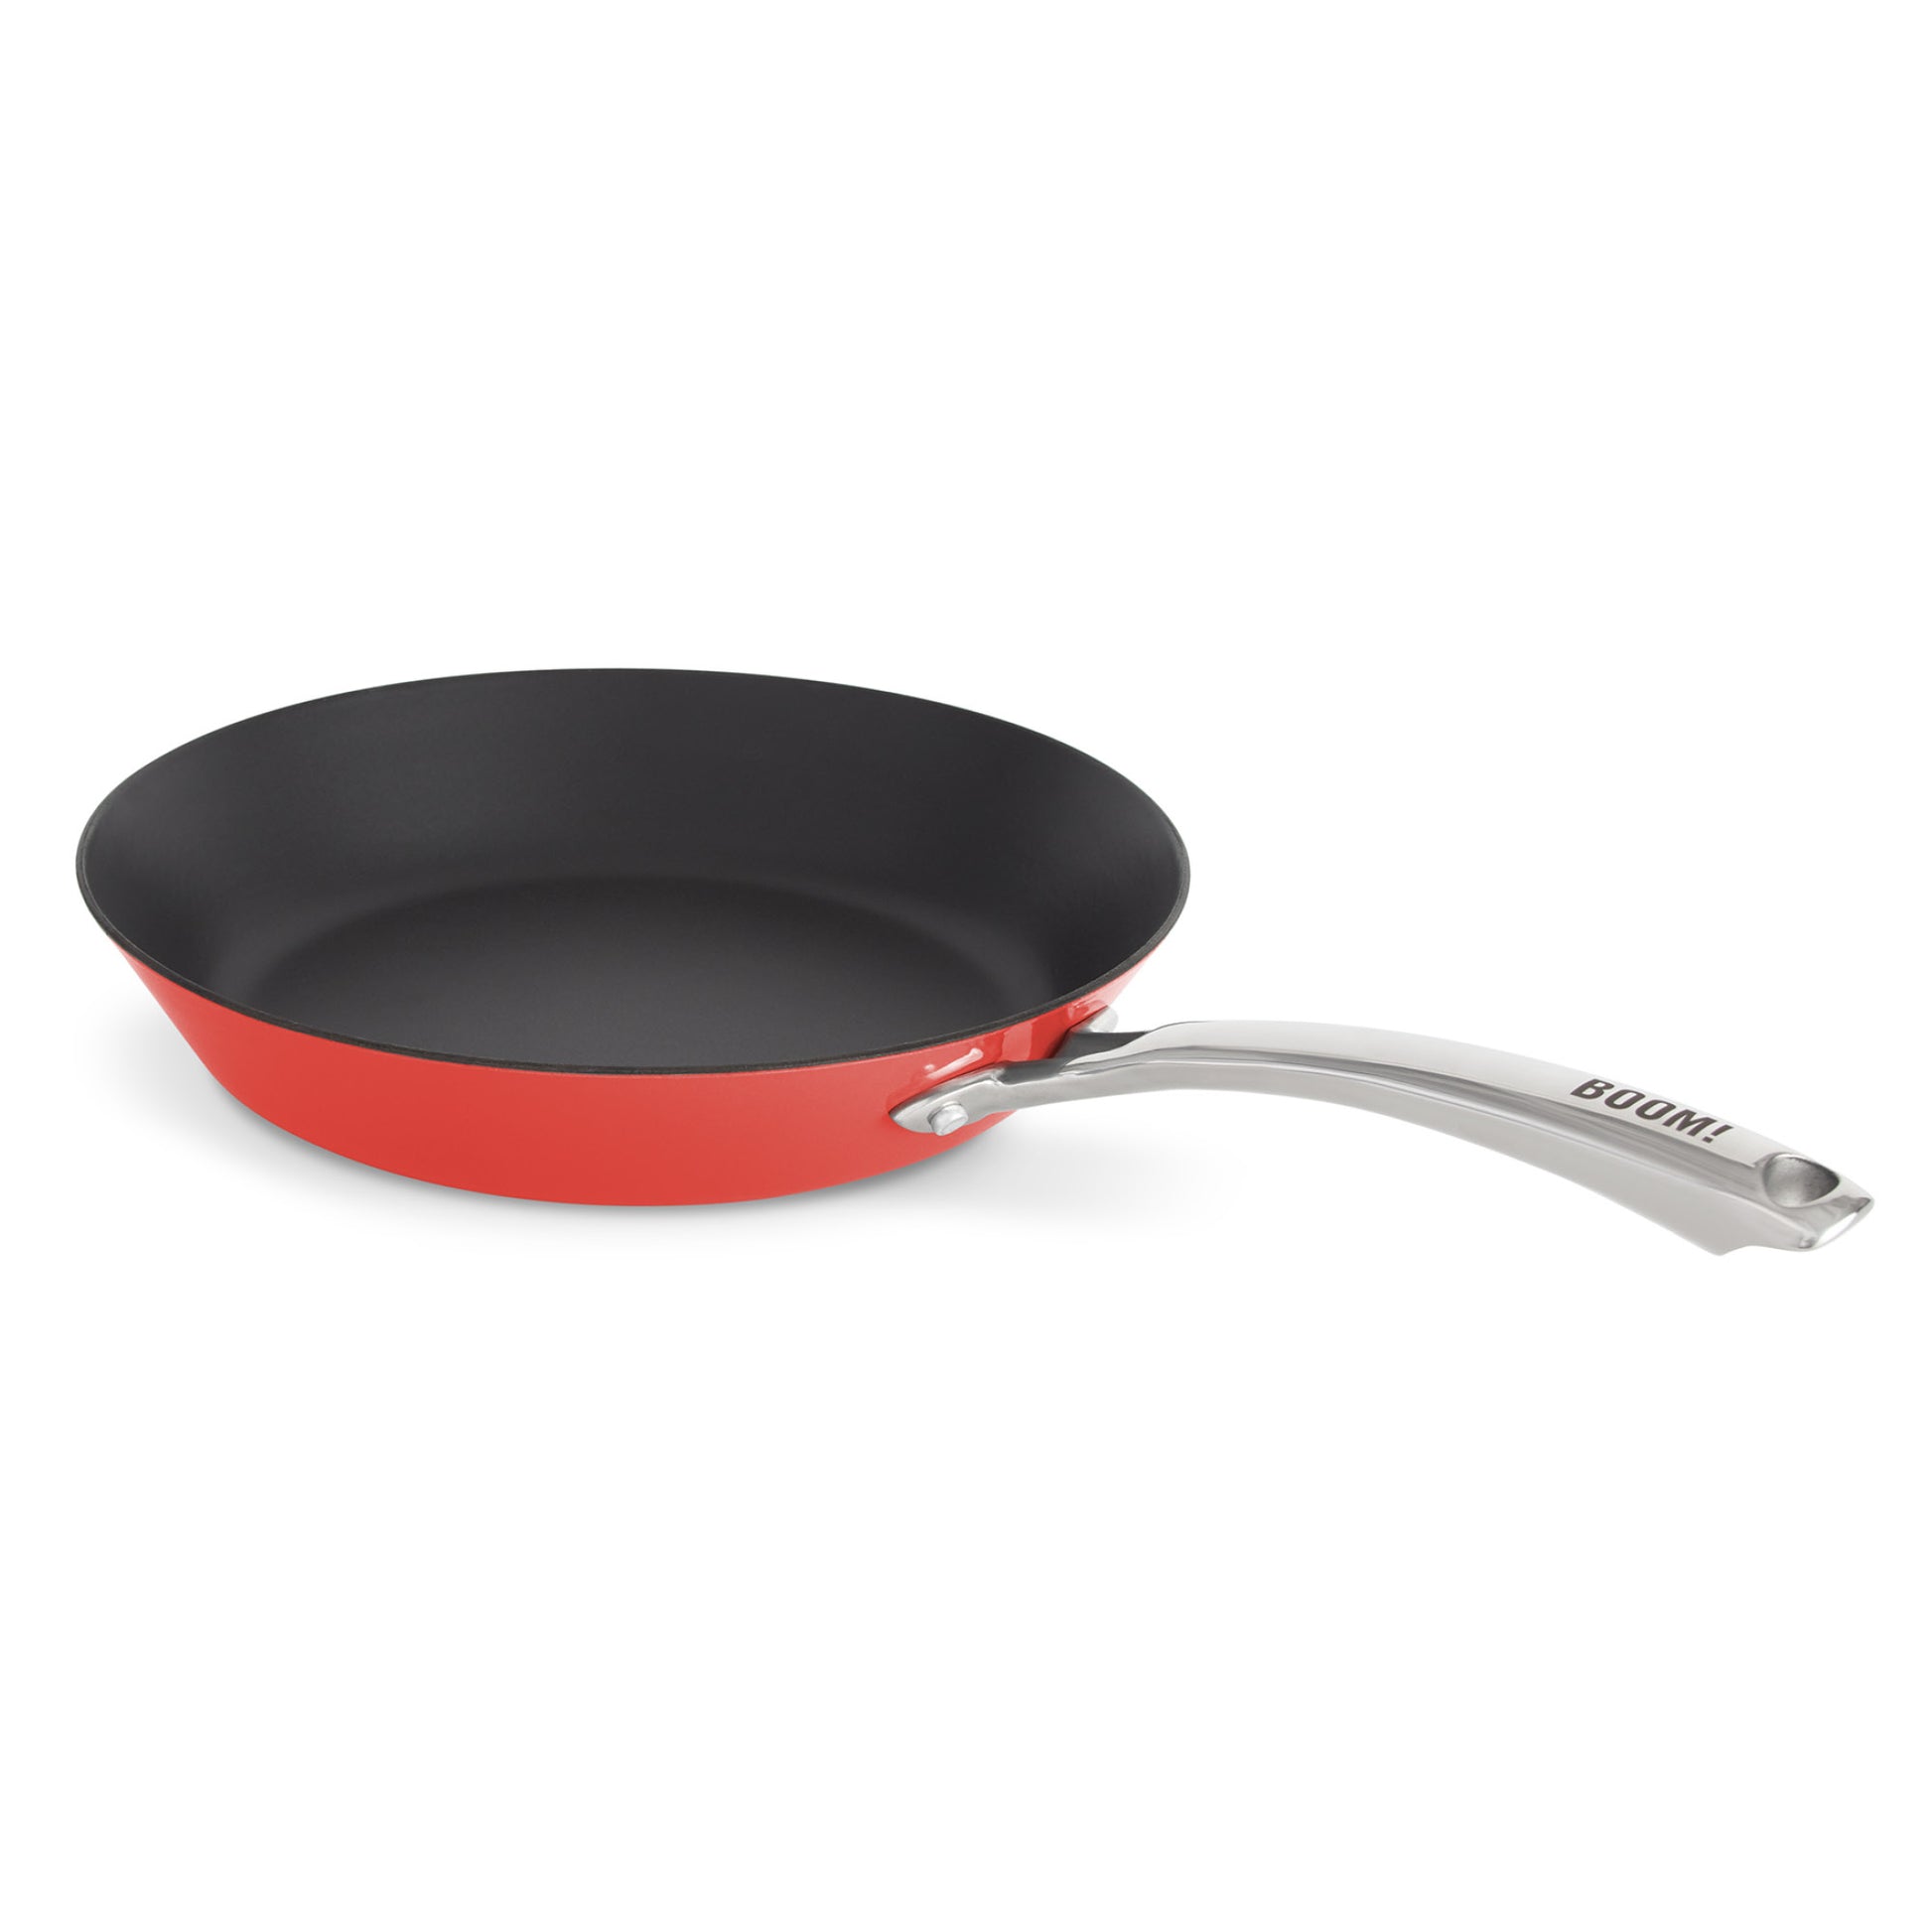 Carbon Steel Fry Pan cookware The Fit Cook x Dash Sriracha 10" 